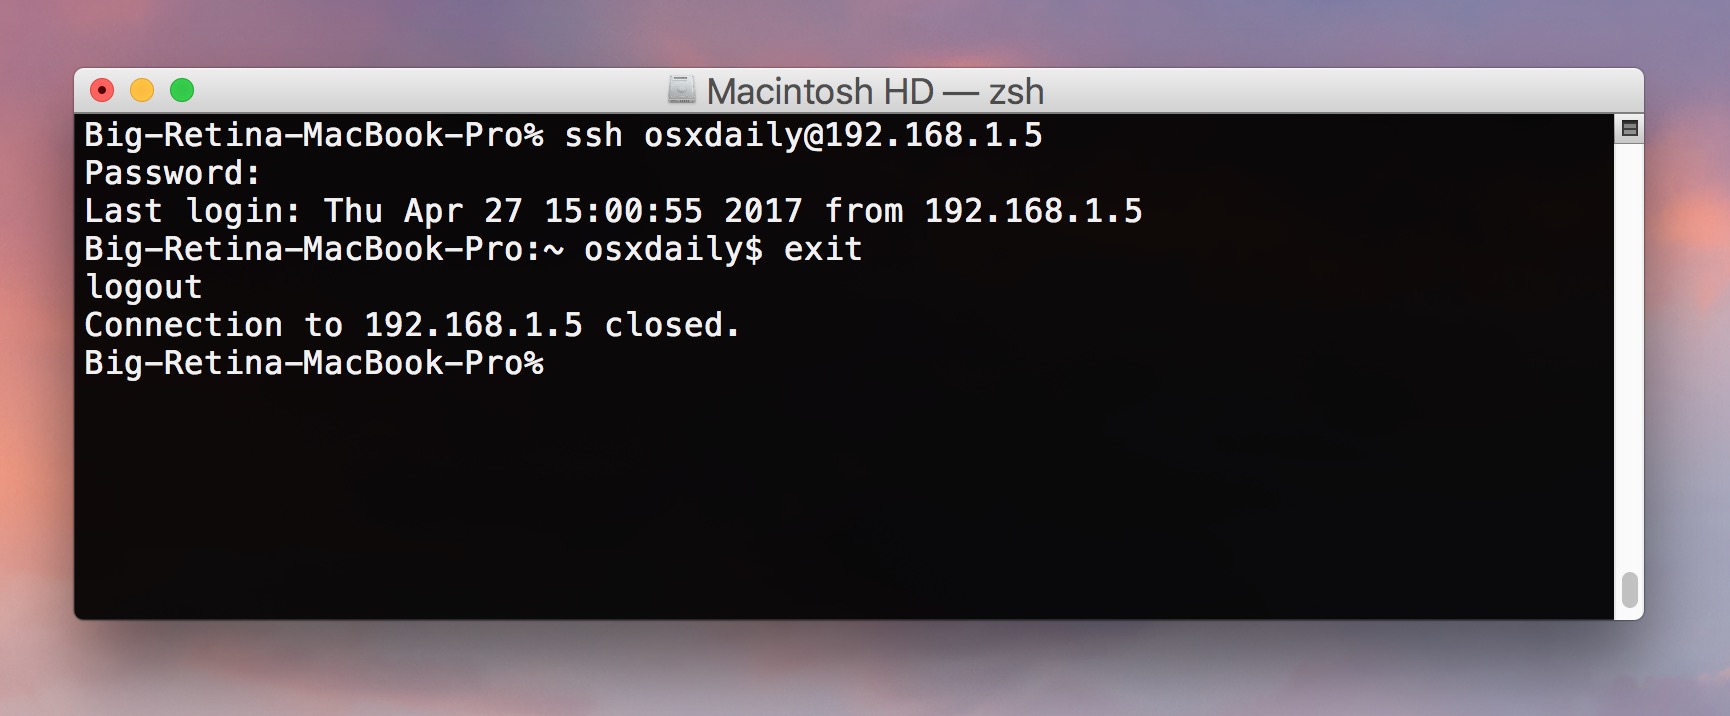 Download Openssh For Mac